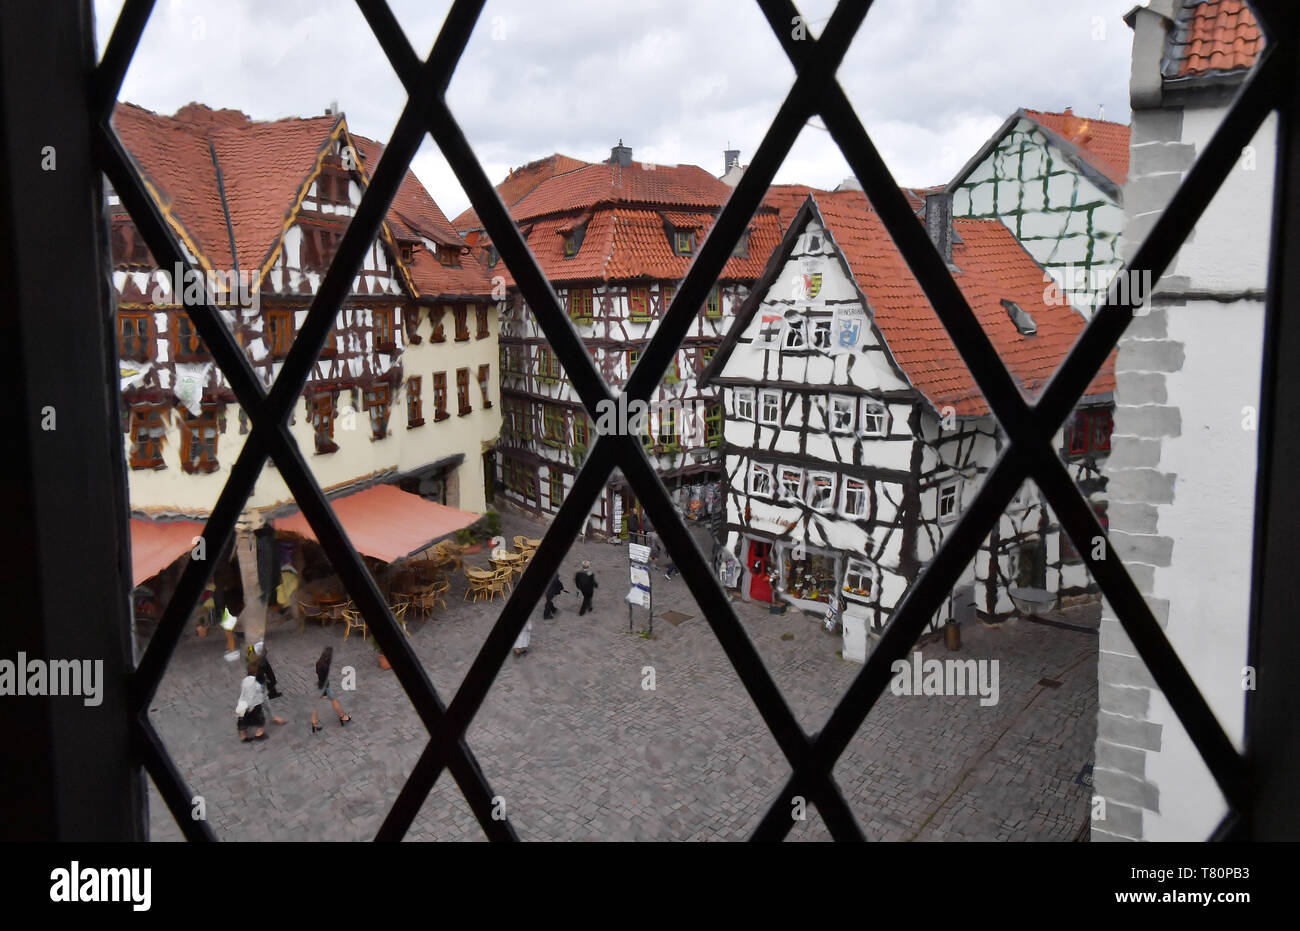 10 May 2019, Thuringia, Schmalkalden: Renovated half-timbered houses characterise the historic old town. The Otto Mueller Museum of Modern Art has now been set up in a restored half-timbered house on Schmalkalder Altmarkt. Large parts of the work of the German expressionist Otto Müller are shown on two floors. The museum opens on 11 May. Photo: Martin Schutt/dpa-Zentralbild/dpa Stock Photo